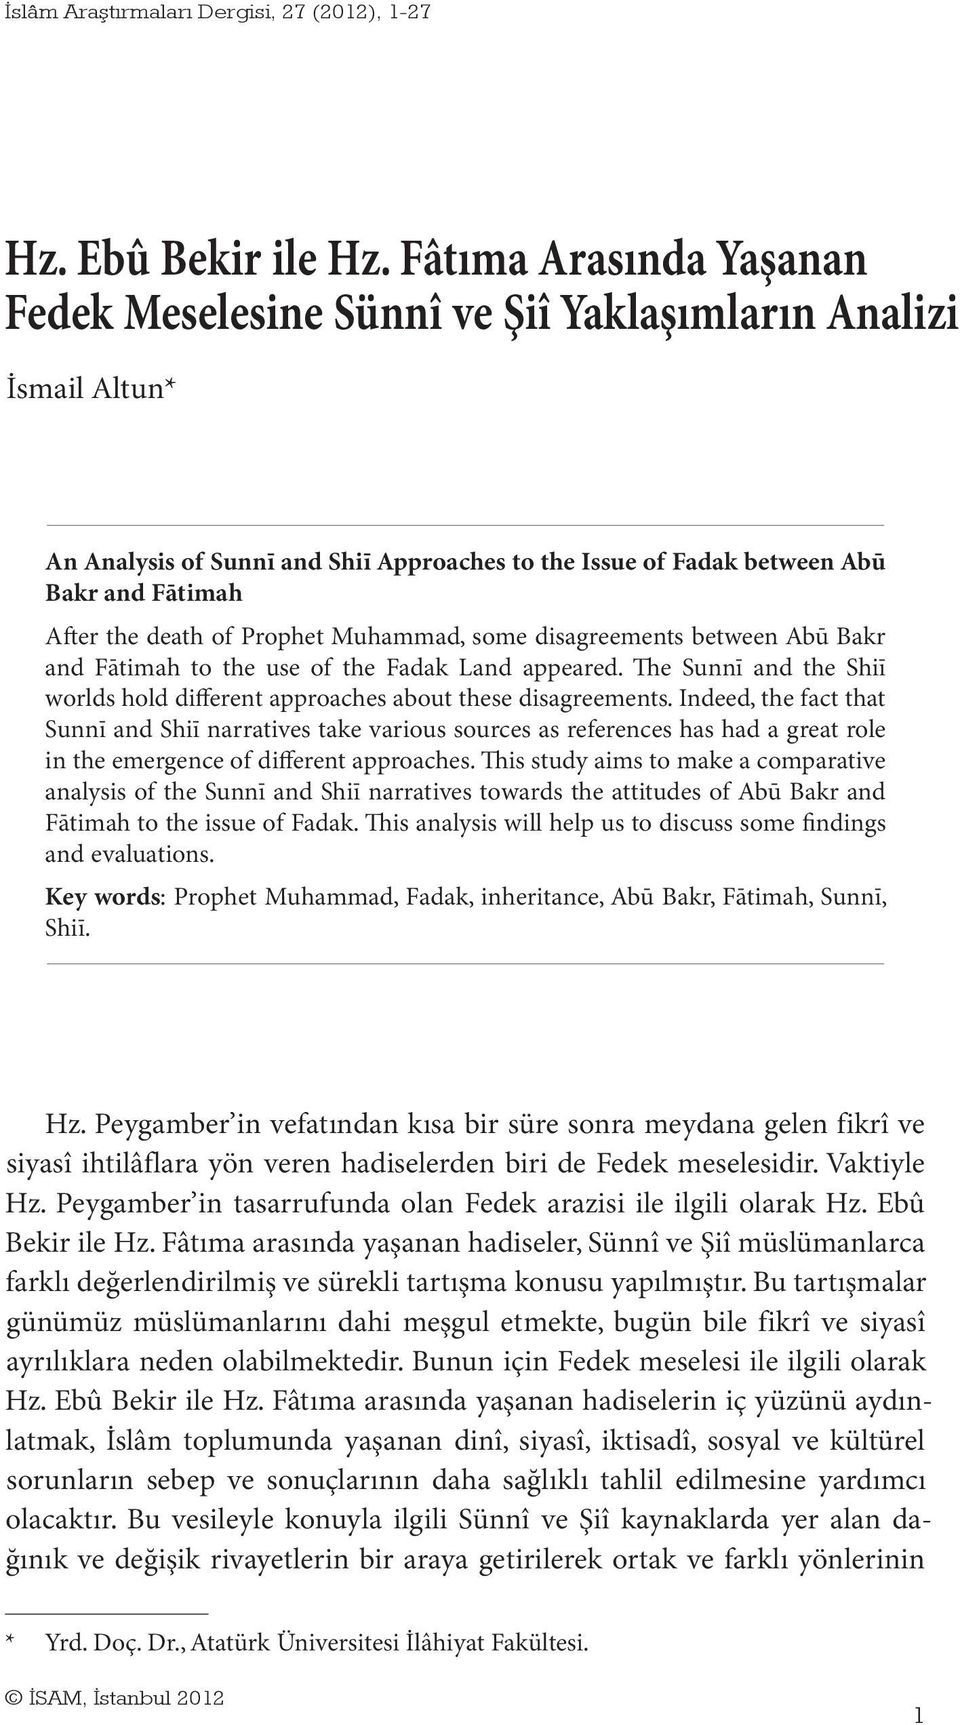 Prophet Muhammad, some disagreements between Abū Bakr and Fātimah to the use of the Fadak Land appeared. e Sunnī and the Shiī worlds hold different approaches about these disagreements.